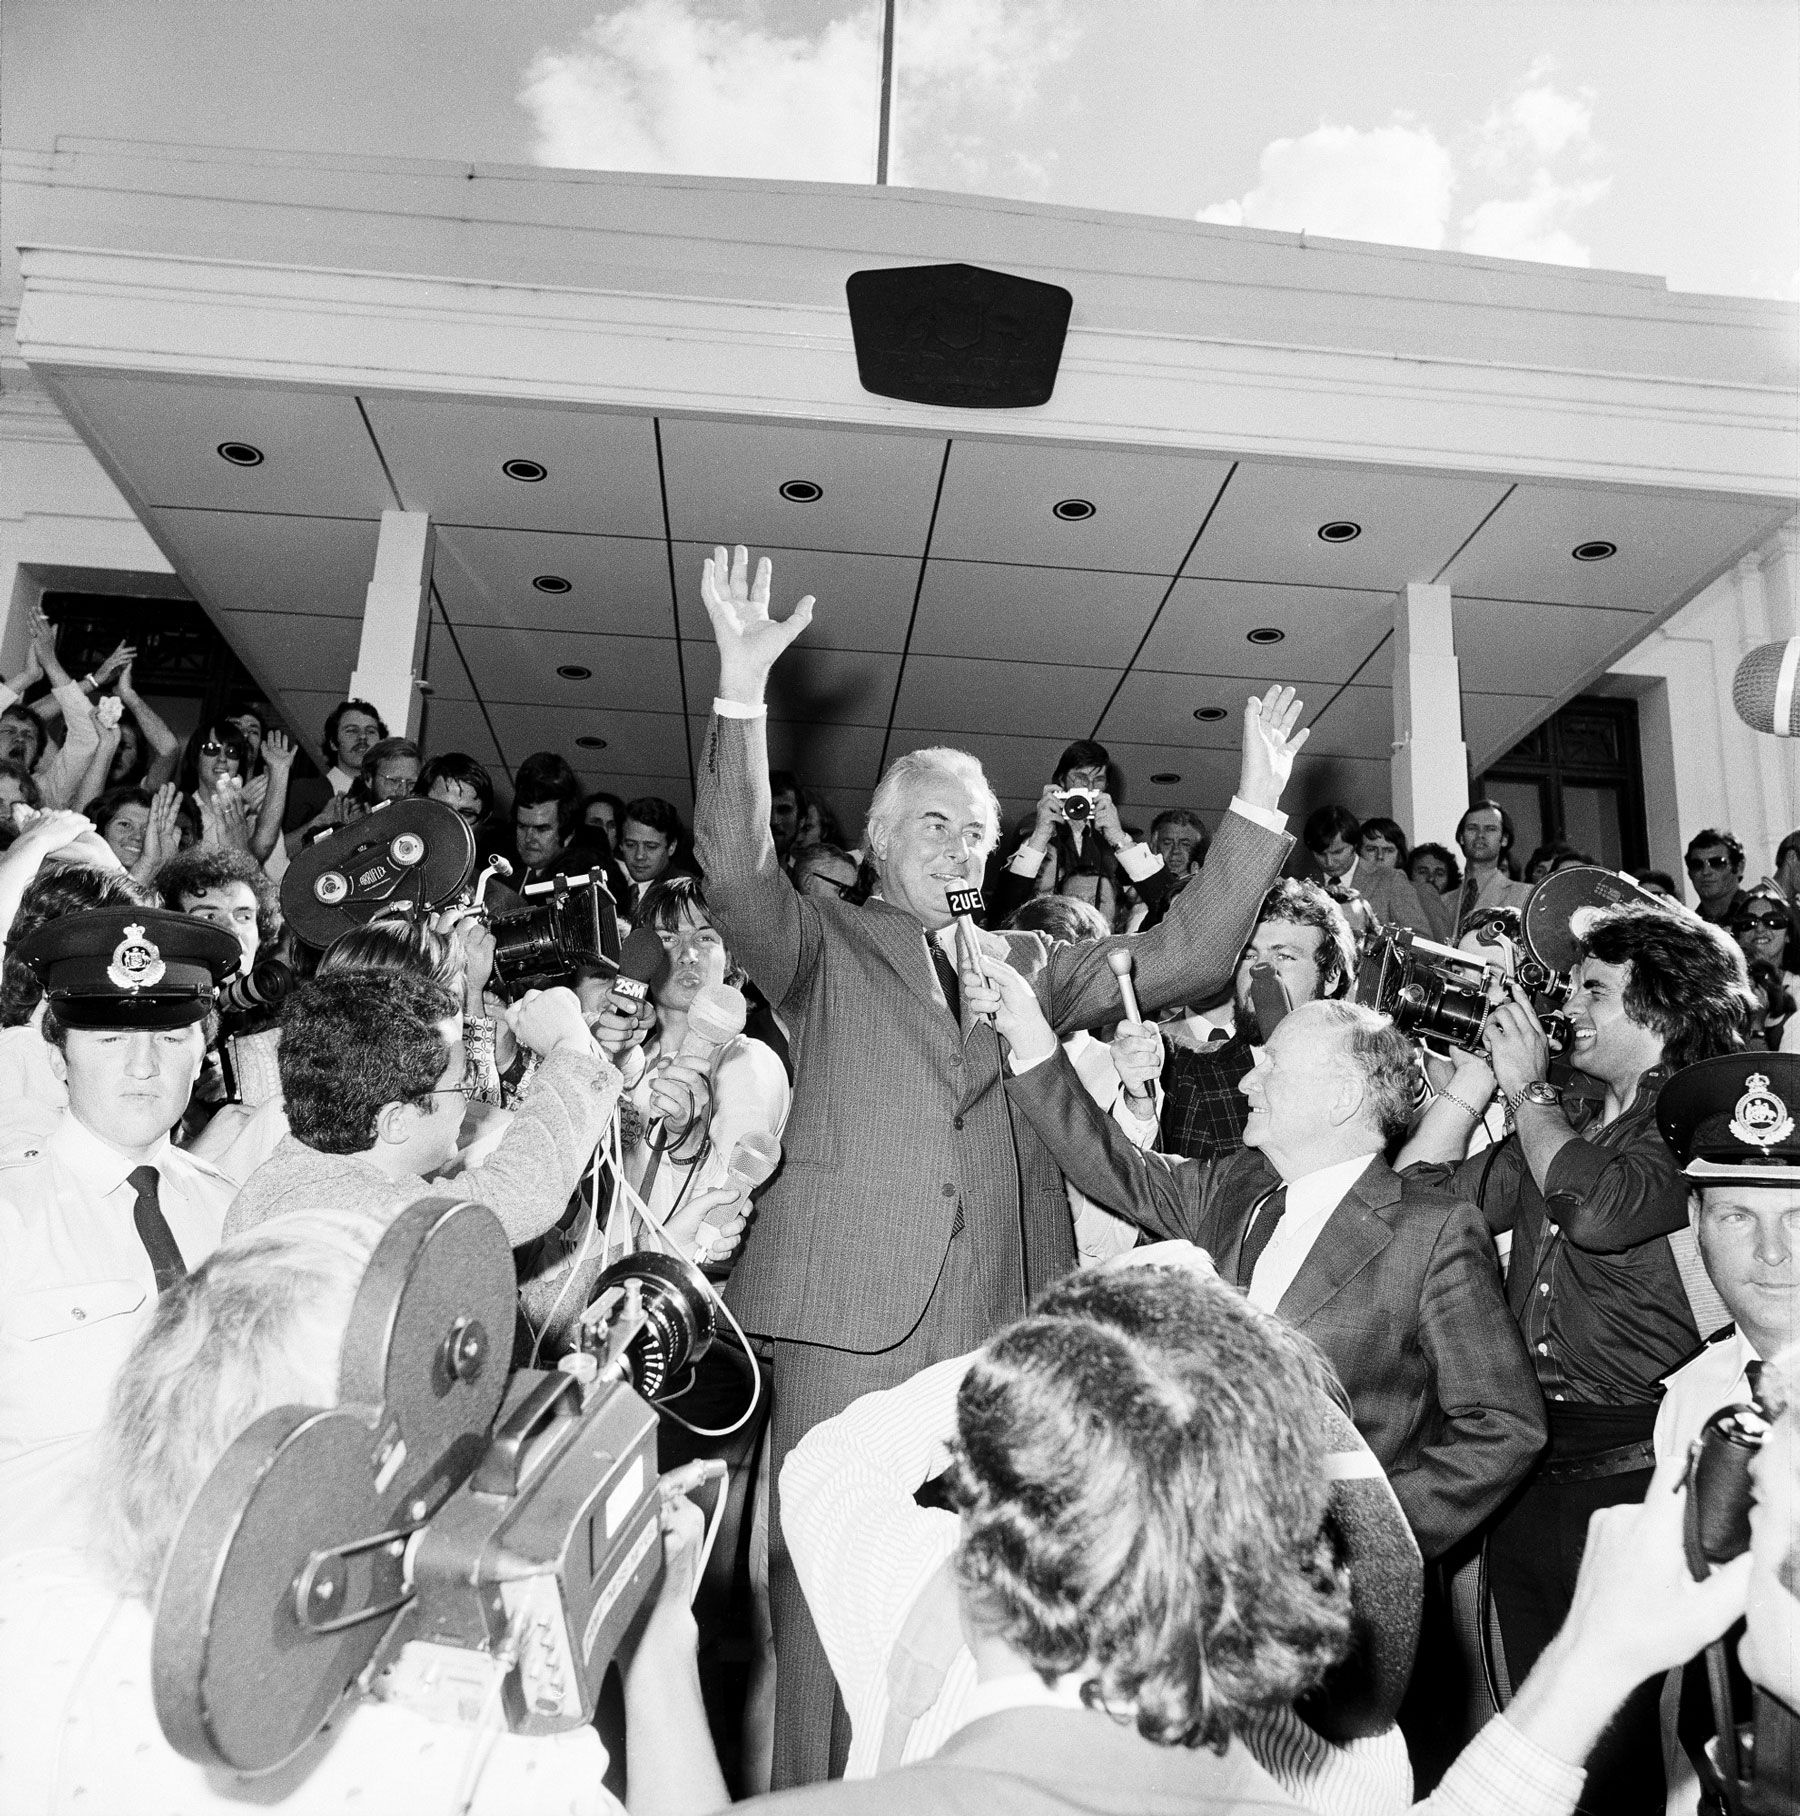 Gough Whitlam and supporters demonstrate against the dismissal of his government on the steps of parliament, 11 November 1975.